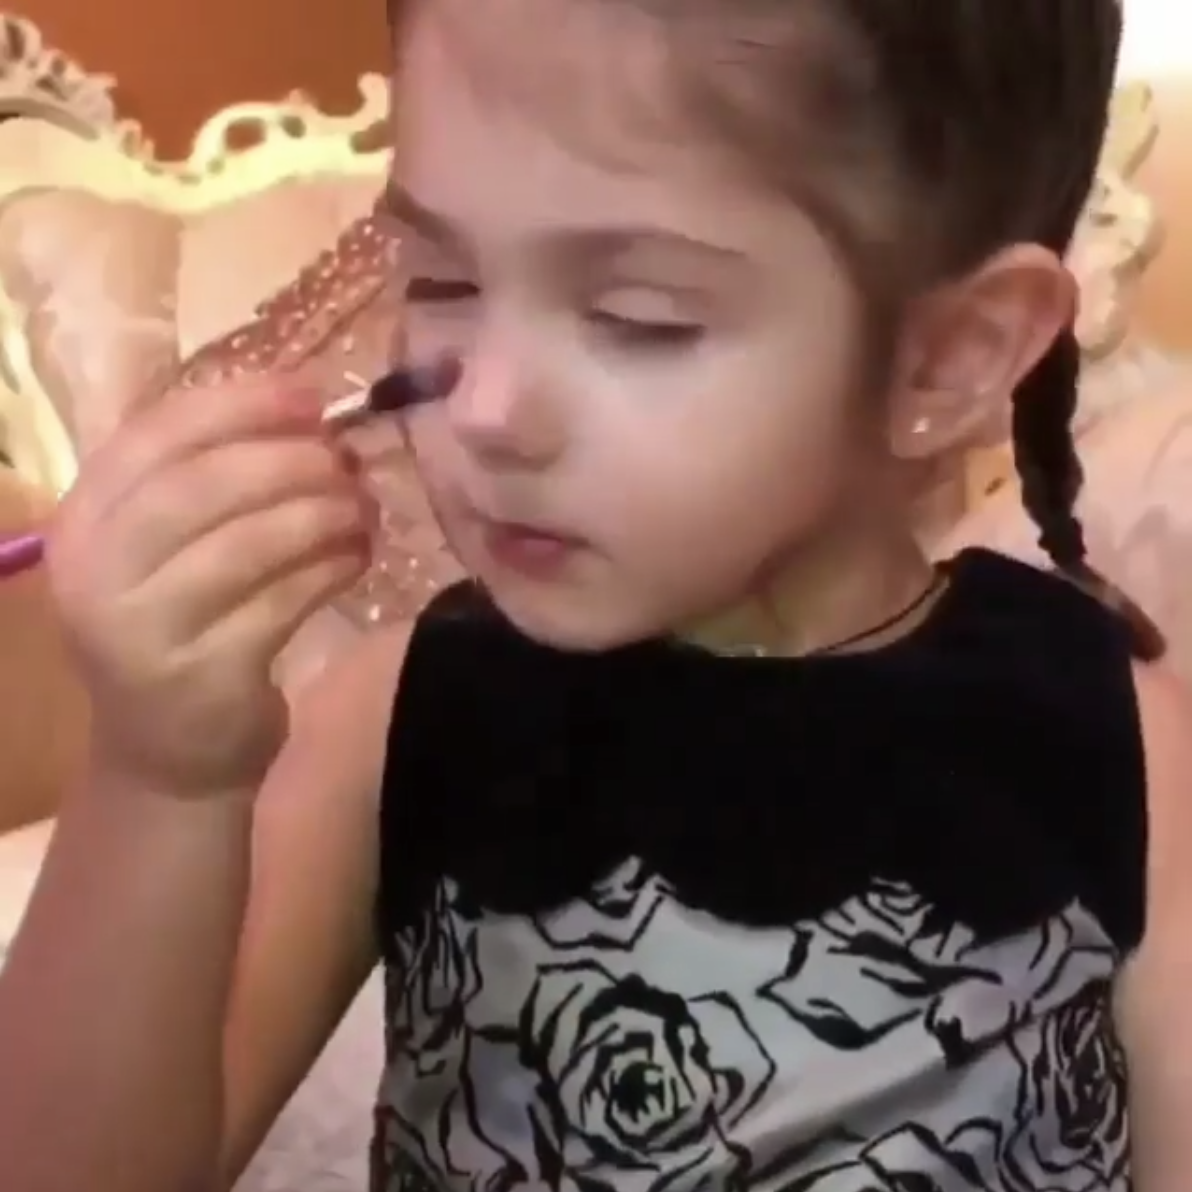 Sephora Shopper Claims a Child Destroyed Over $1,000 of Makeup